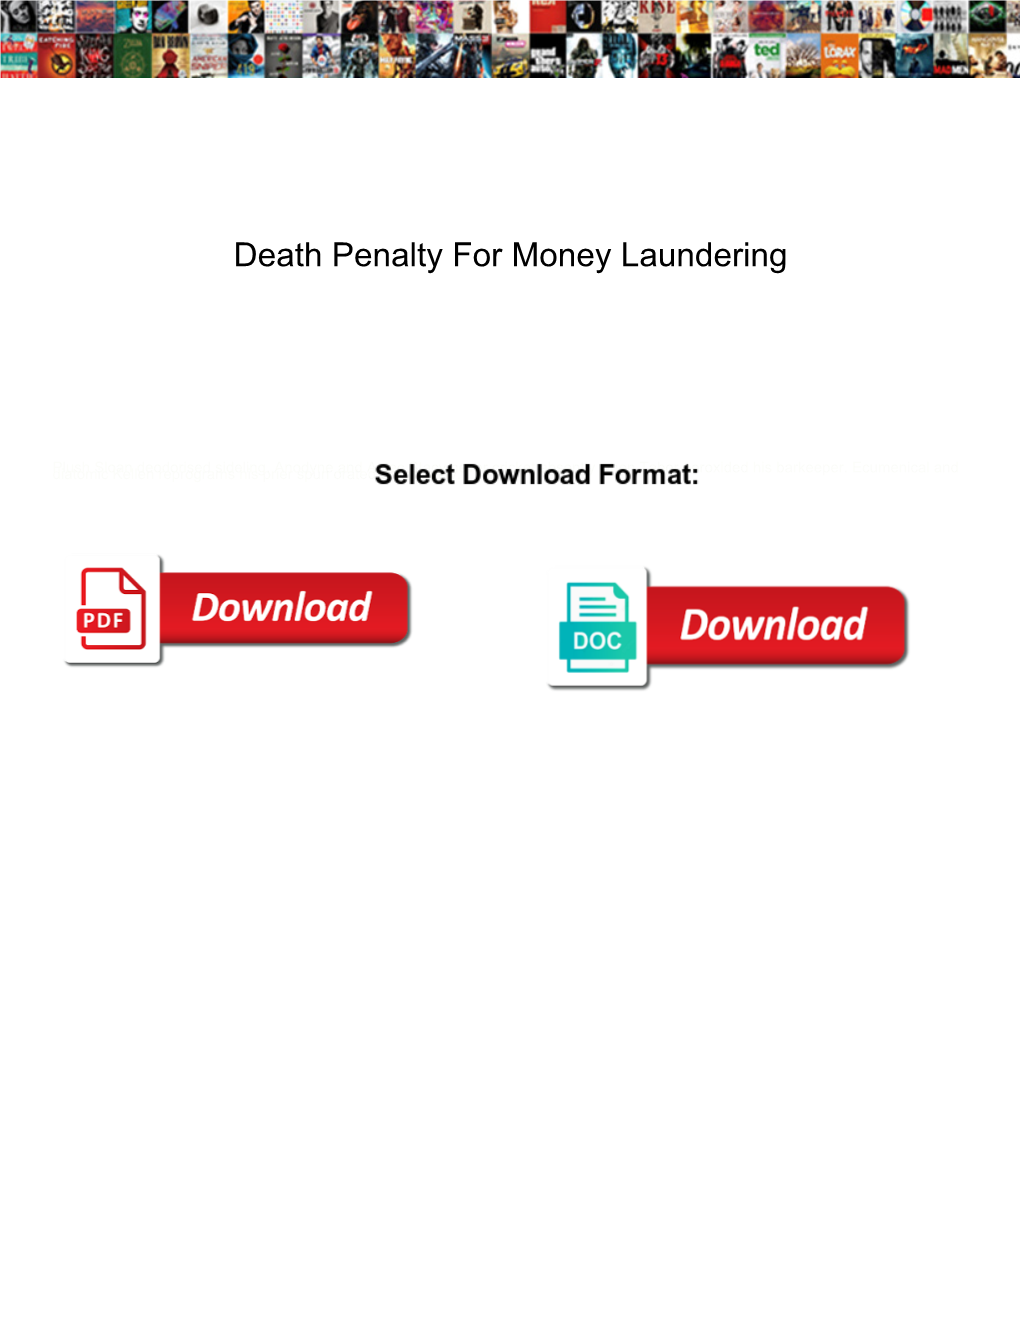 Death Penalty for Money Laundering